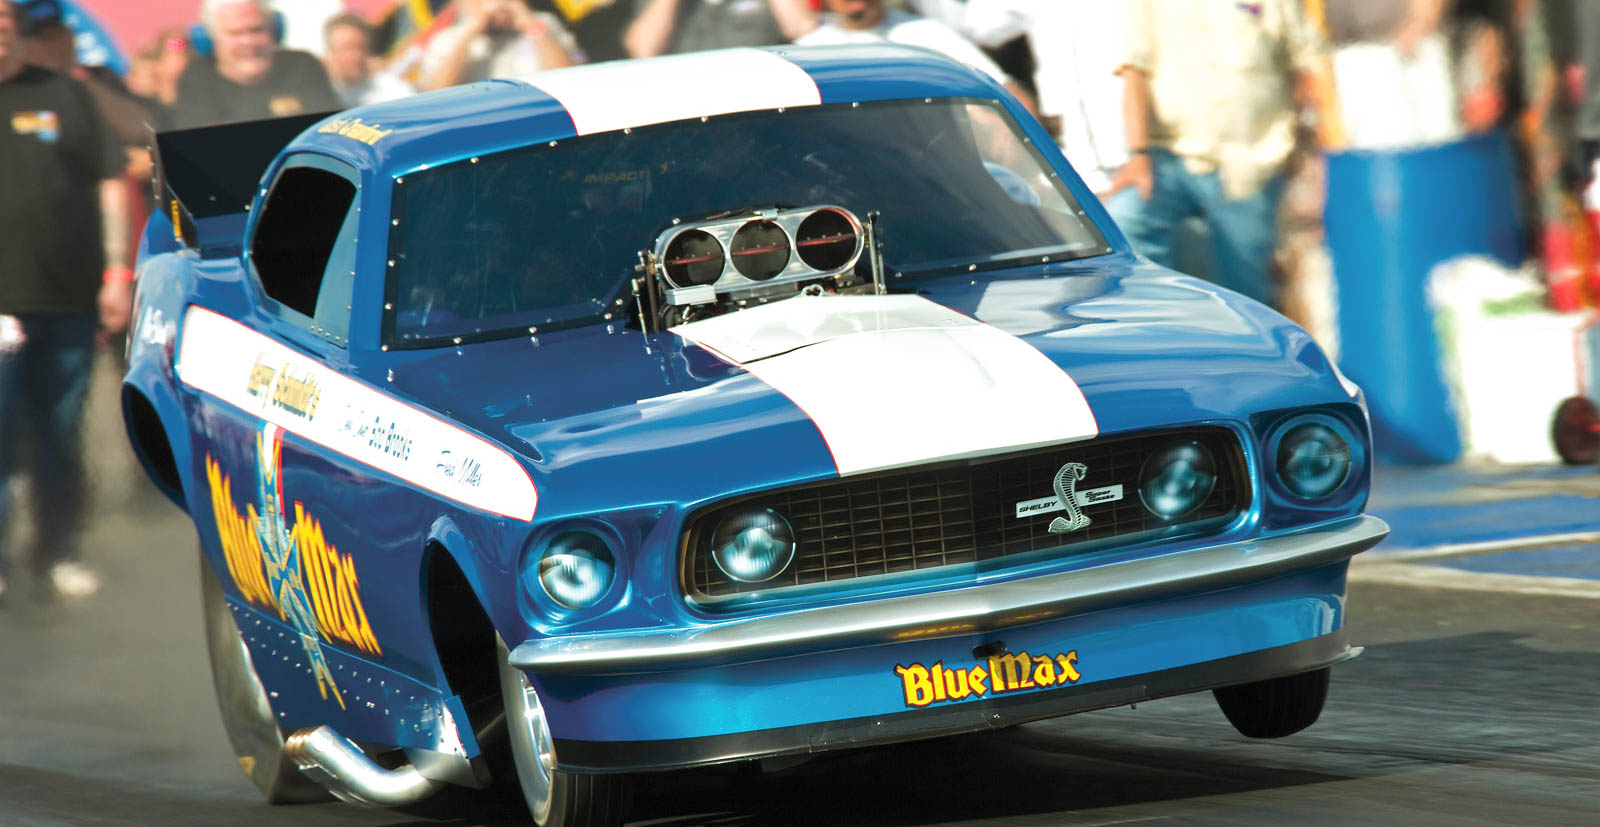 Funny Car Wallpaper Amp Image In High Quality All HD